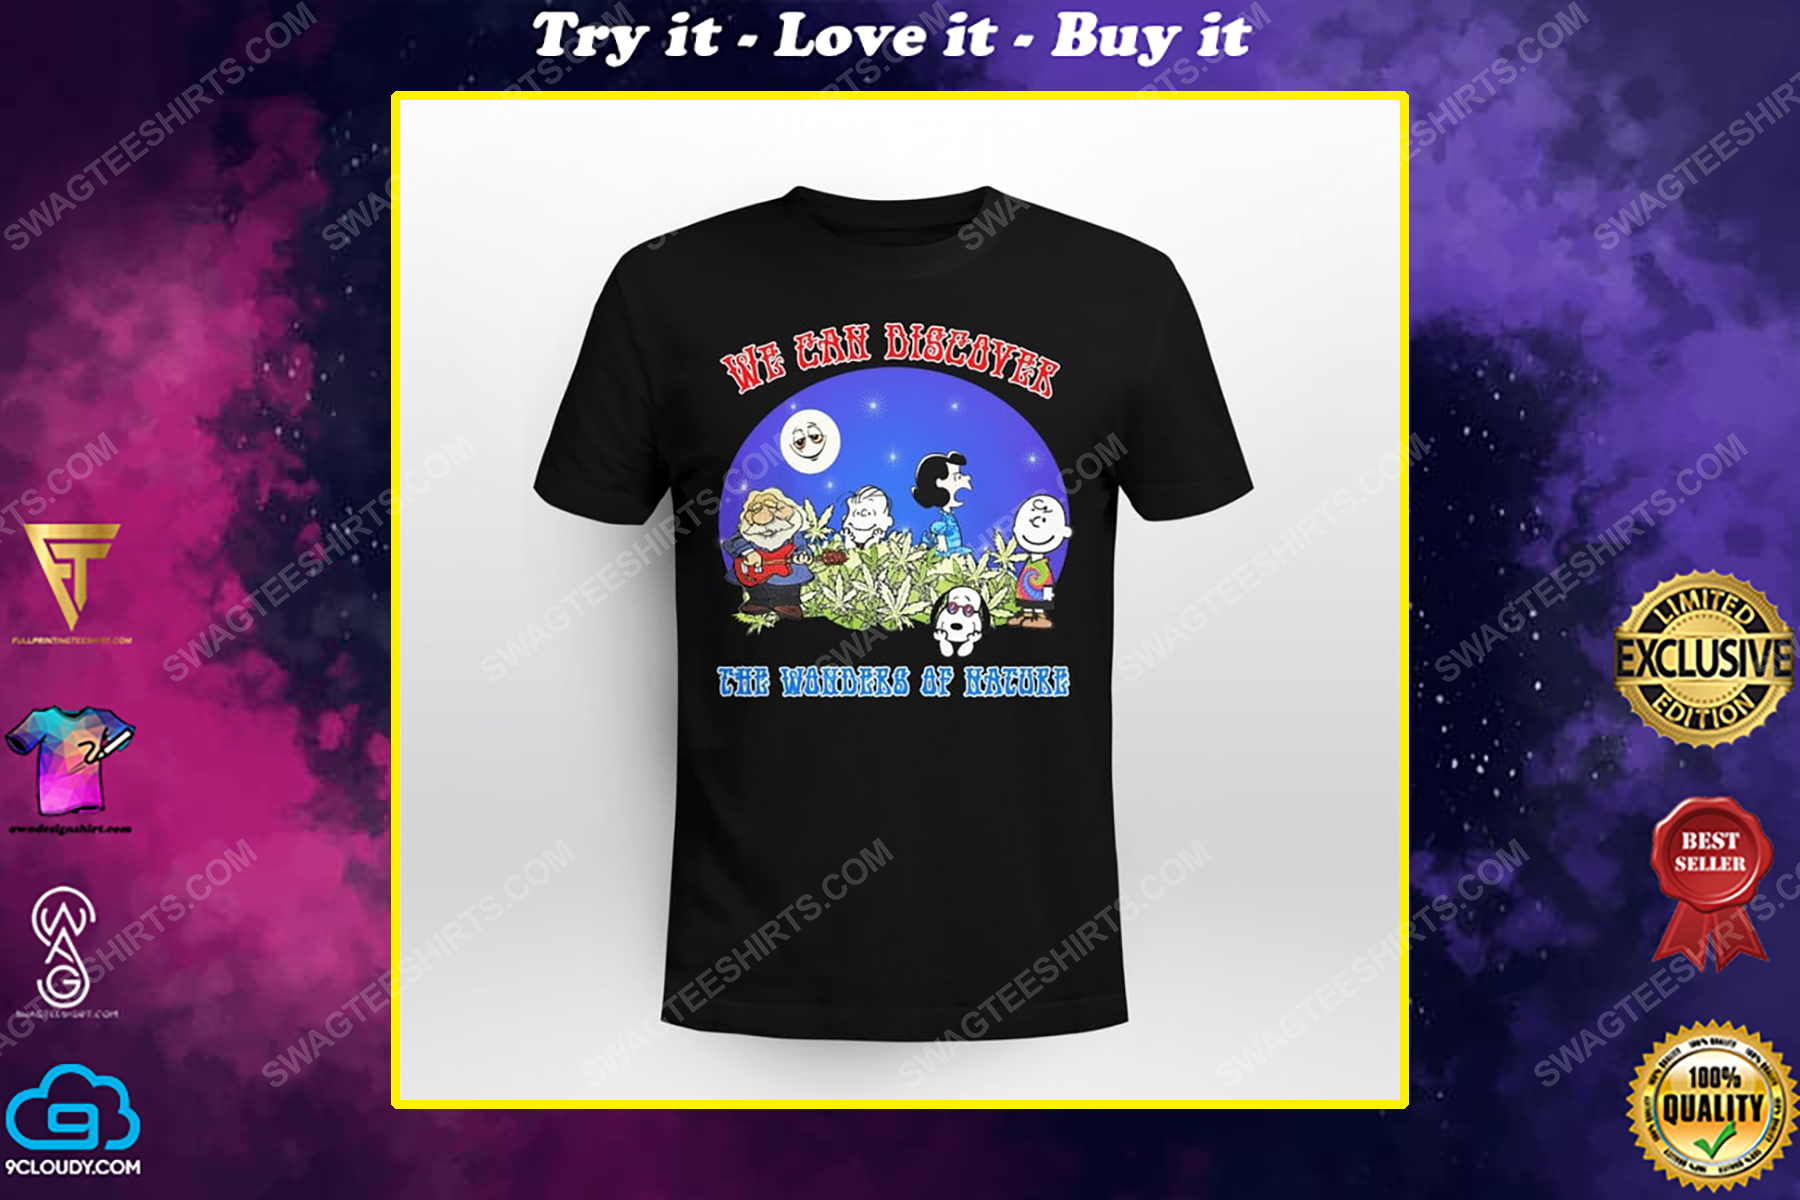 We can discover the wanders of nature charlie brown and snoopy and weed shirt